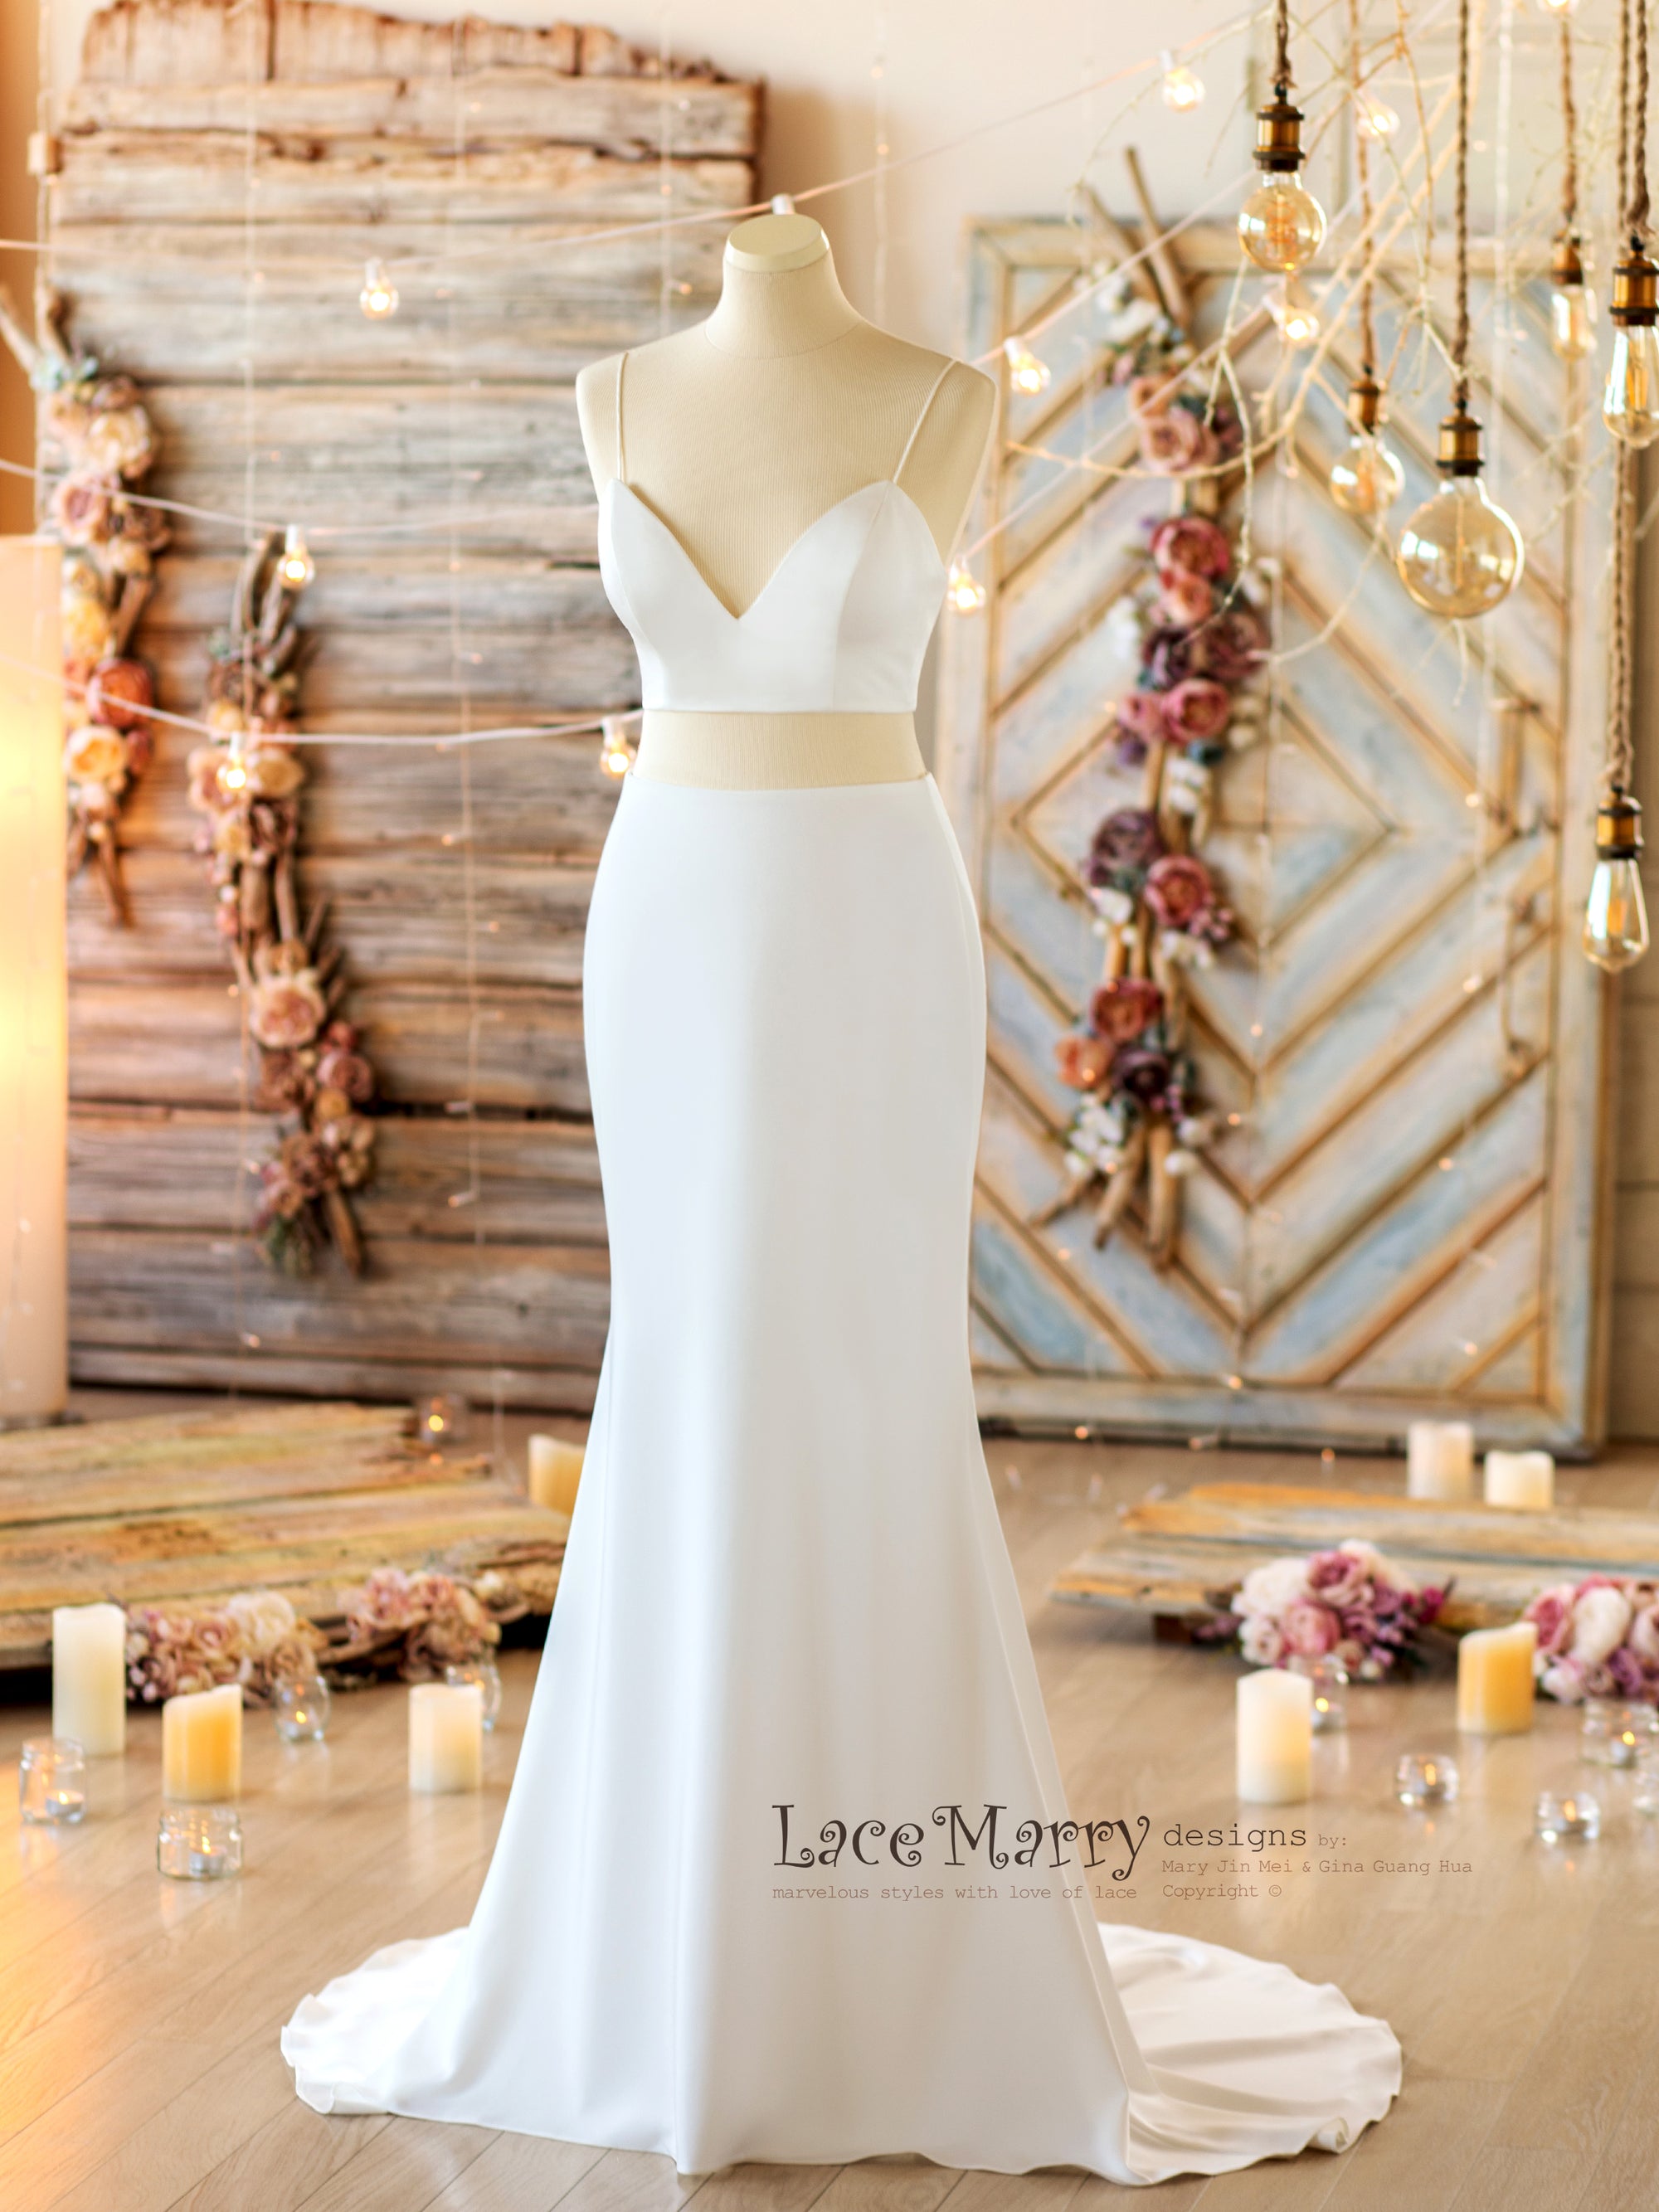 CLEMENTINE LUX / Elegant Wedding Dress with Long Sheer Sleeves - LaceMarry